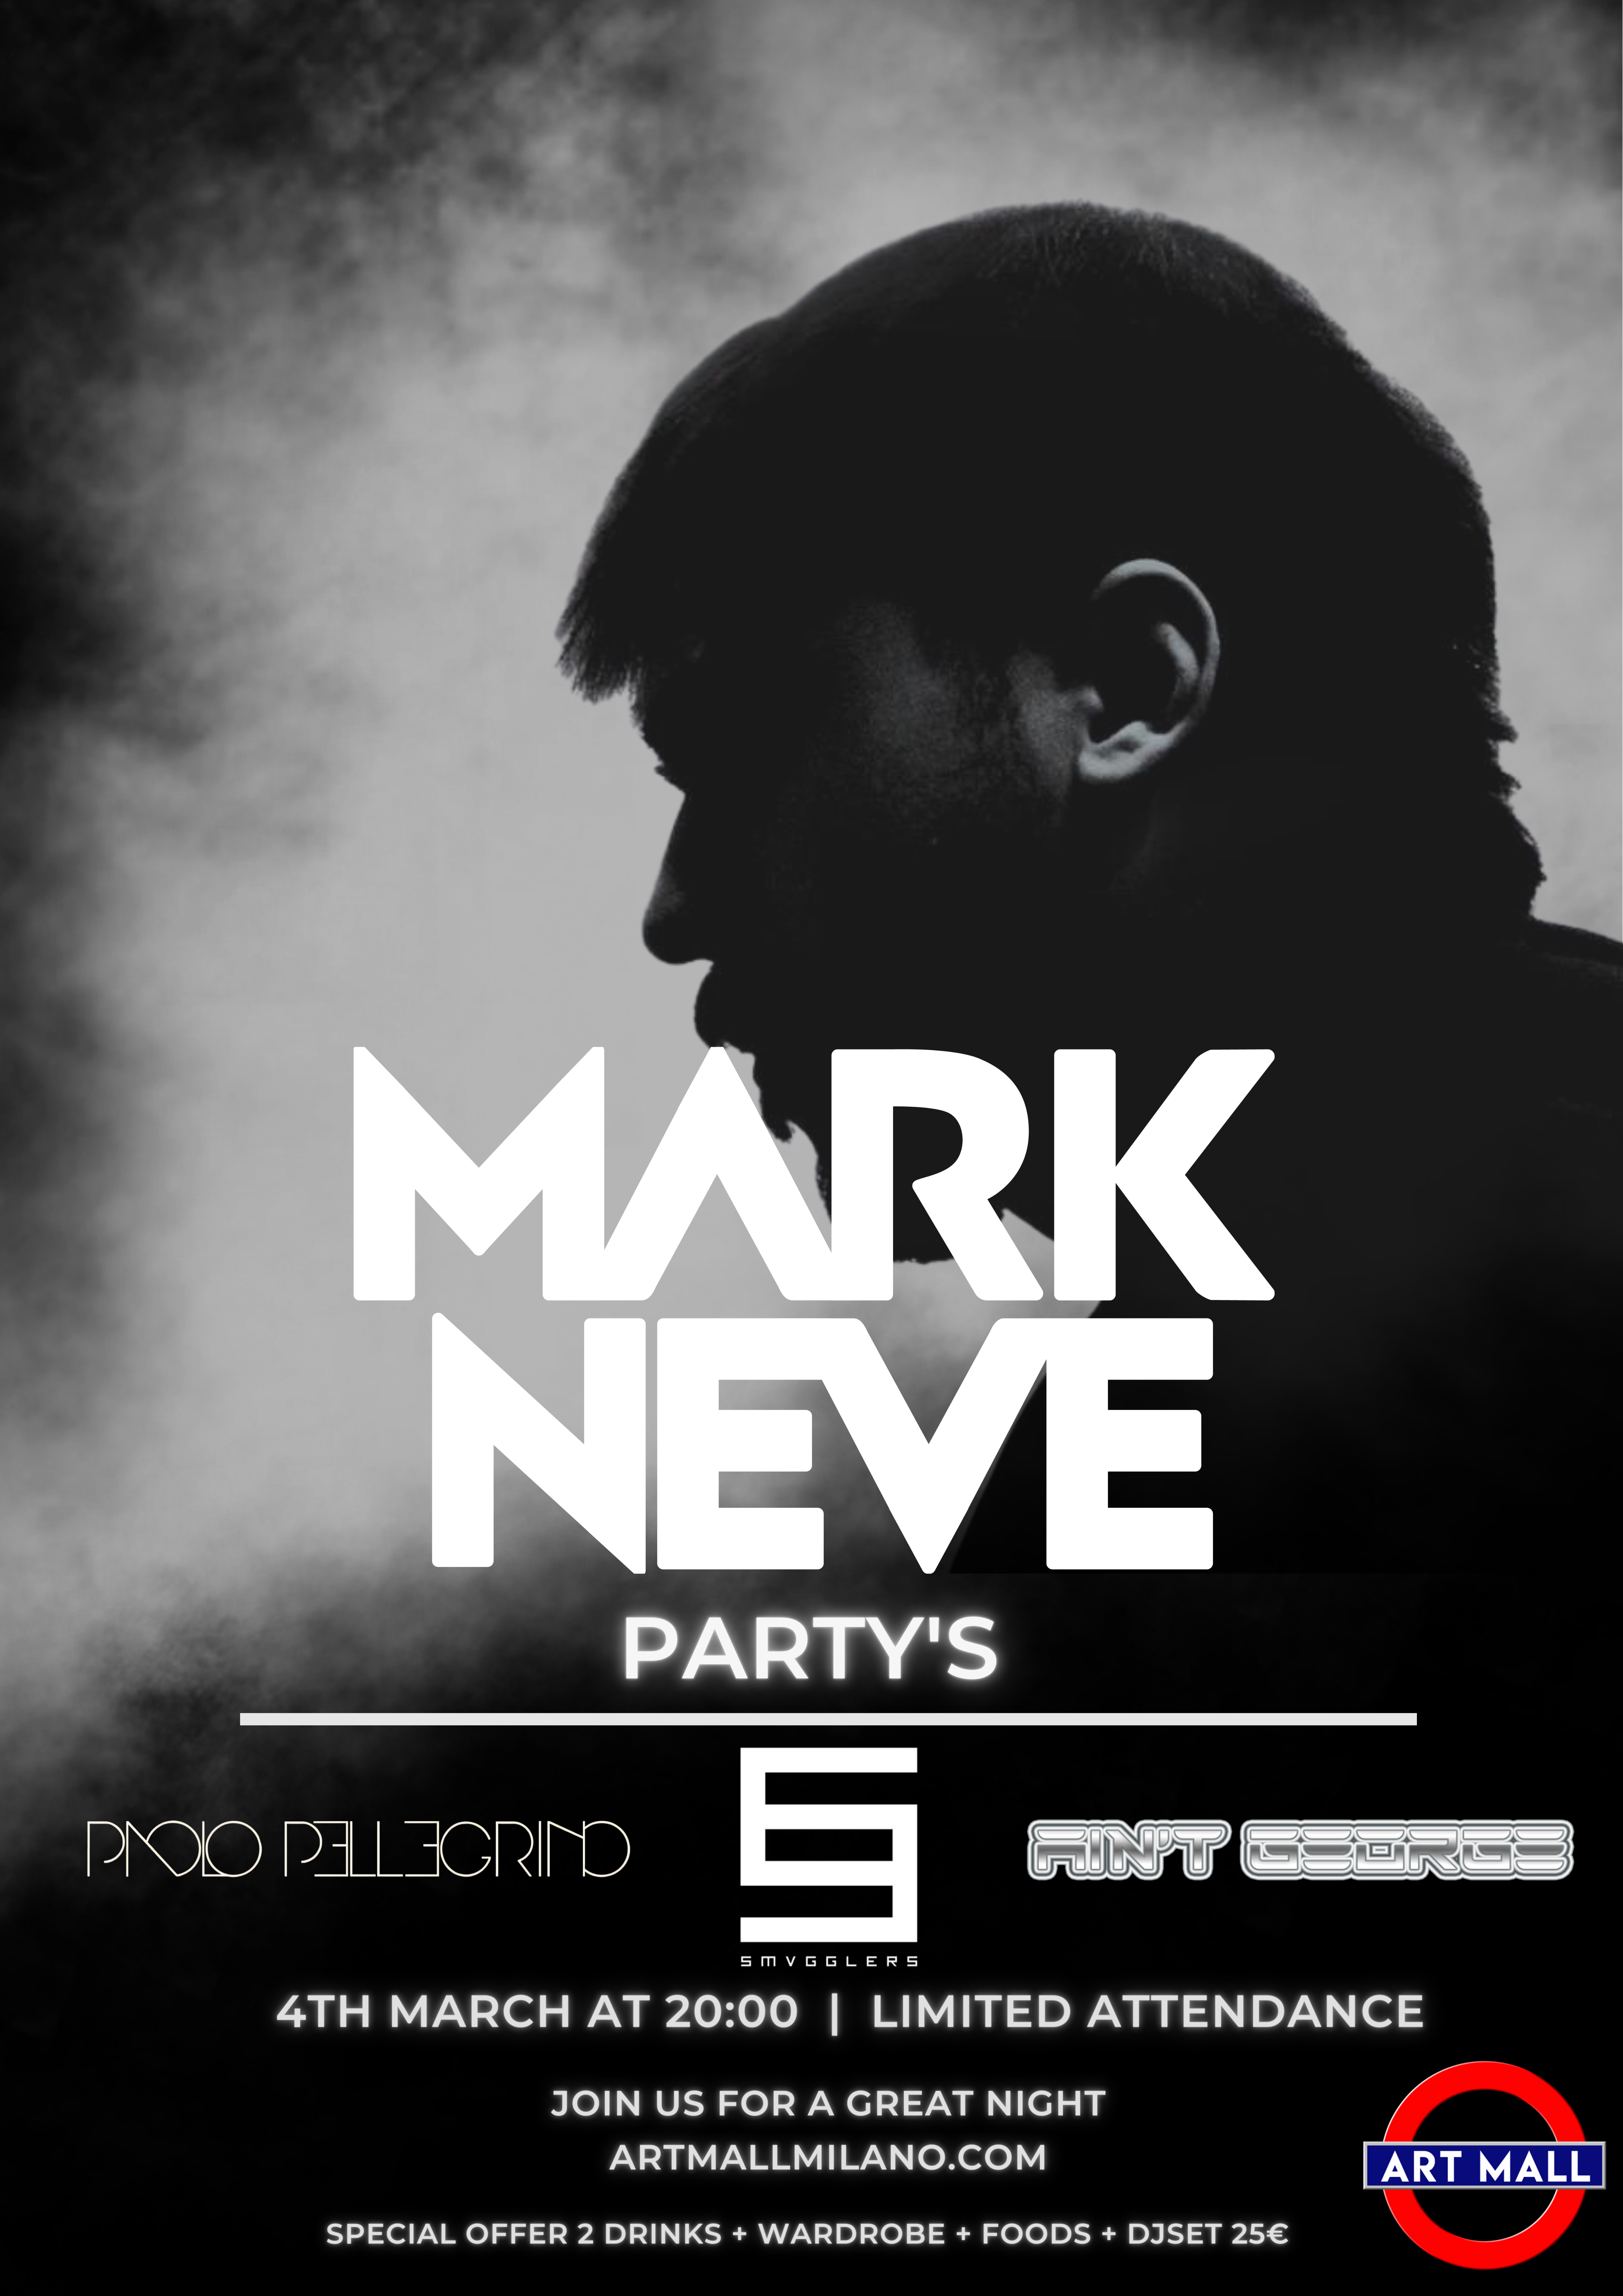 Mark Neve party's - フライヤー表